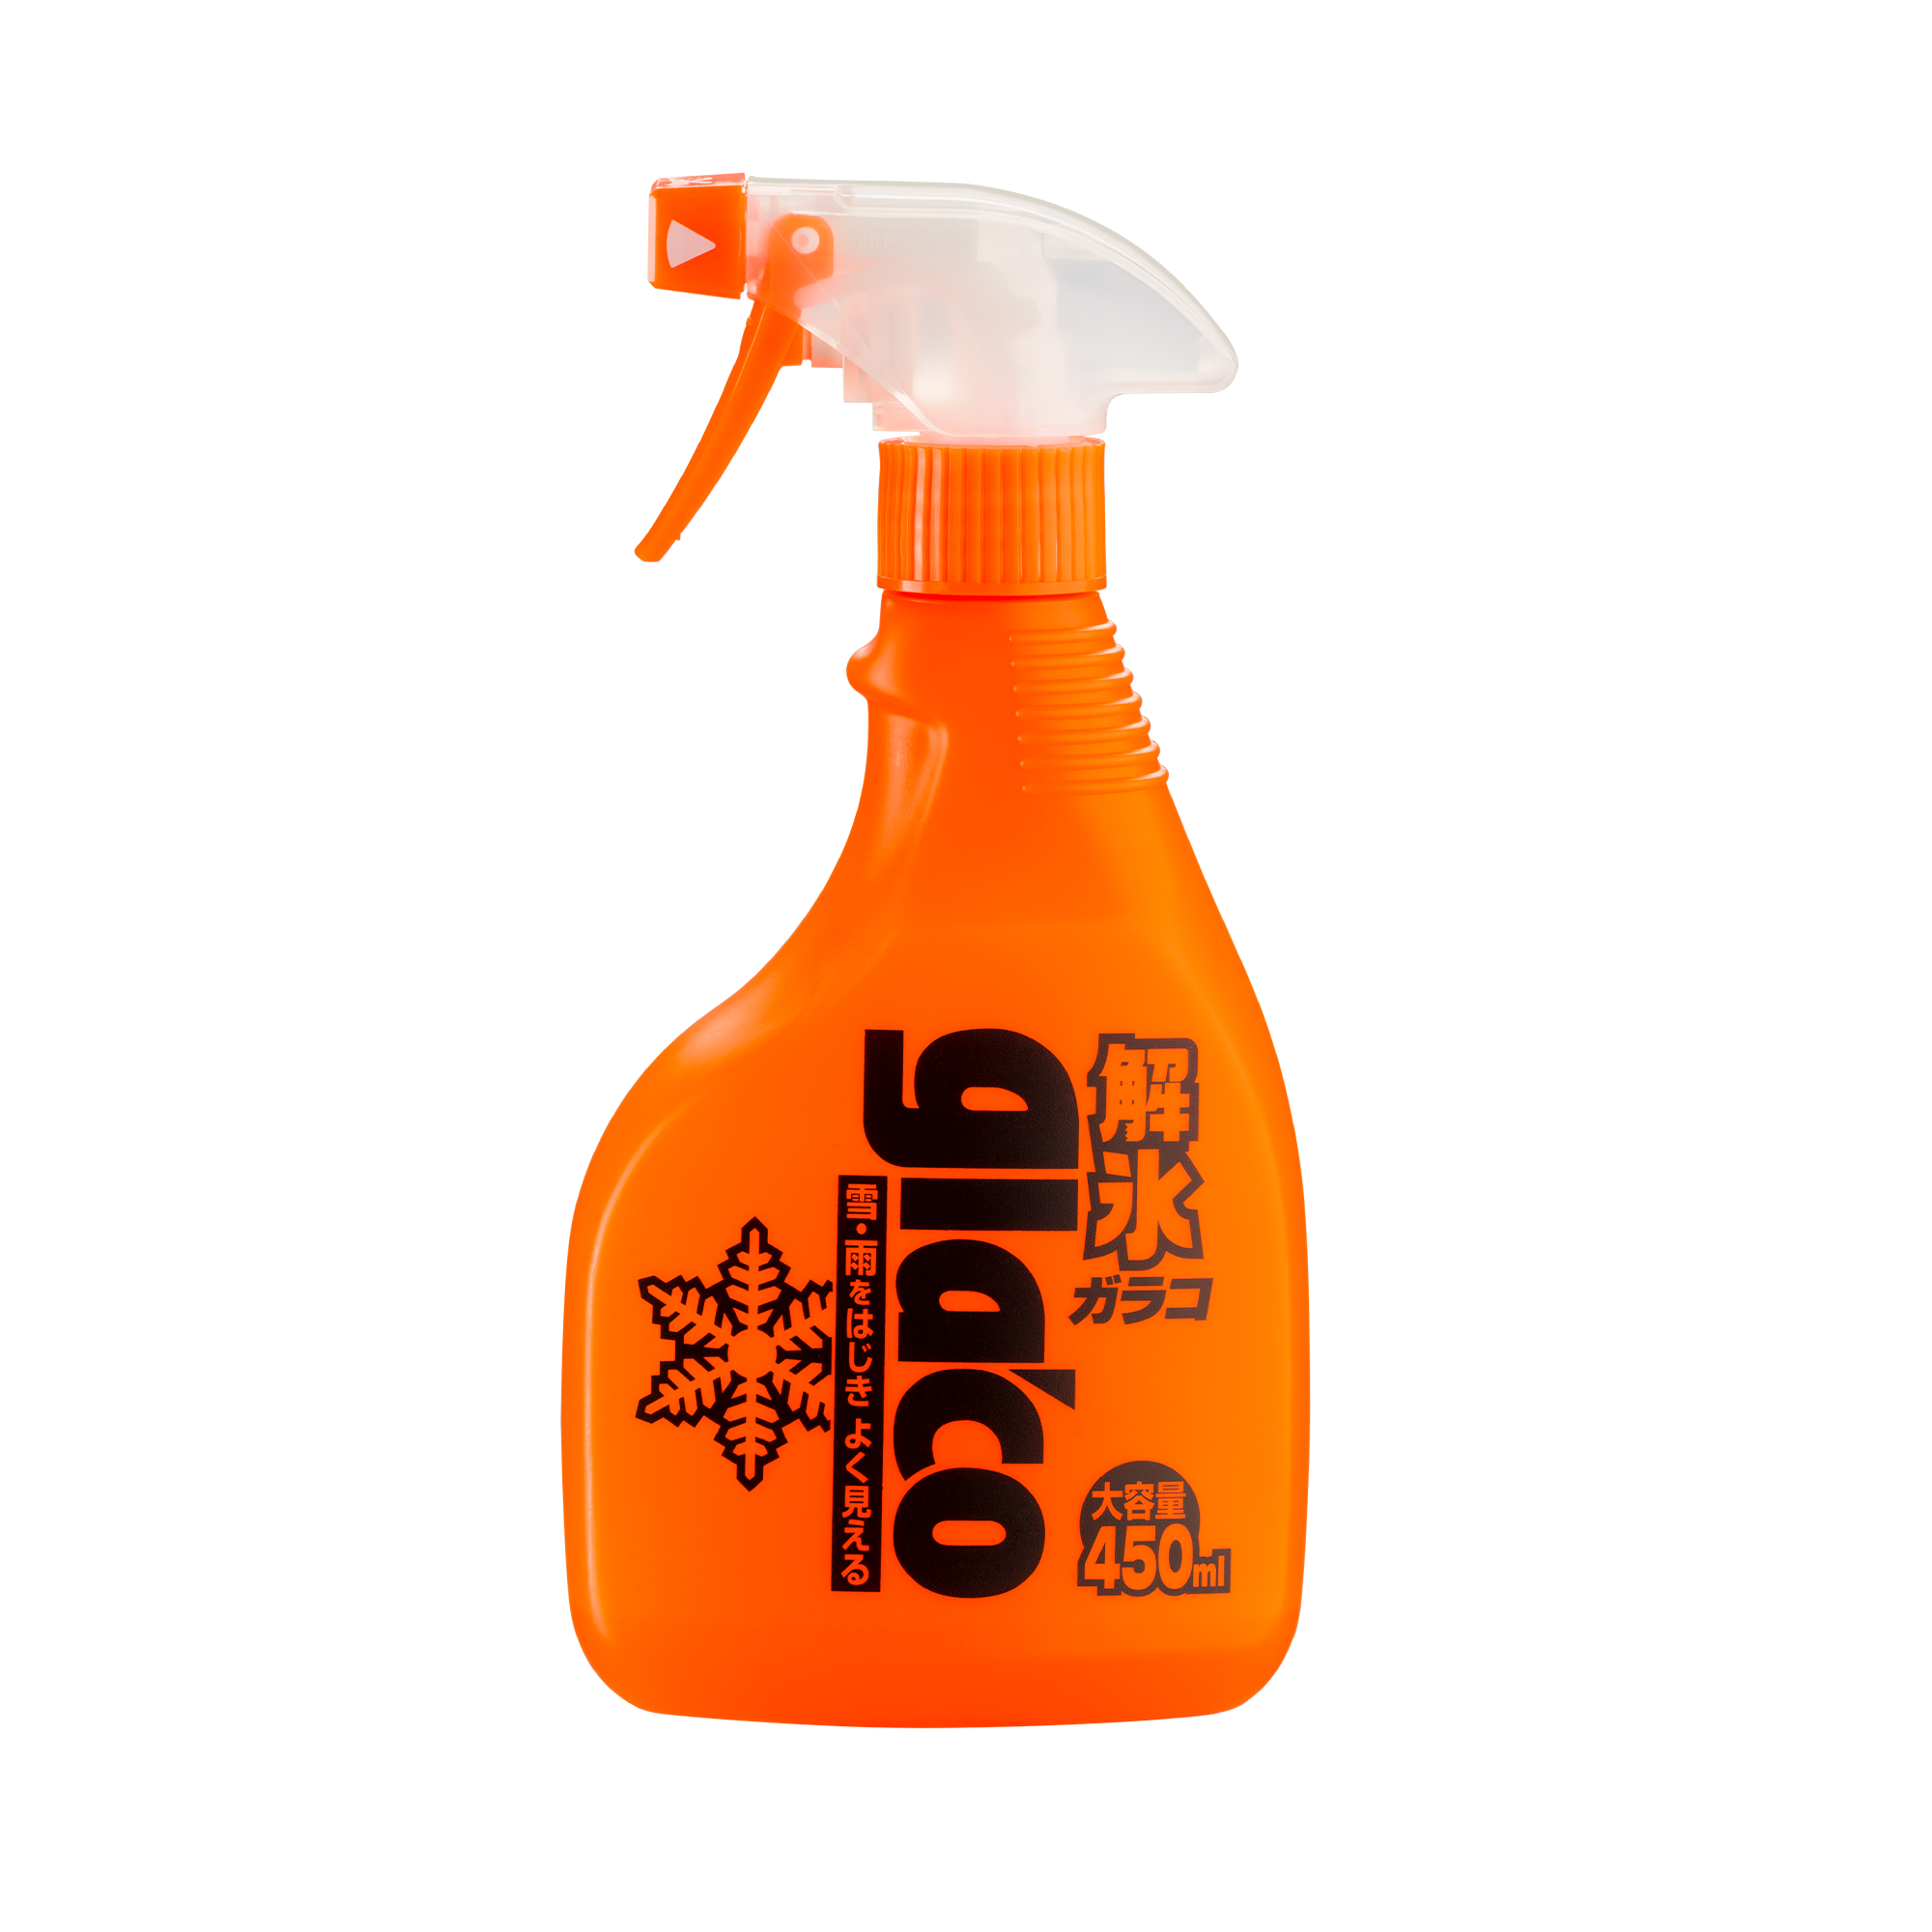 Ultra Glaco, Glass & Mirrors Water repellents